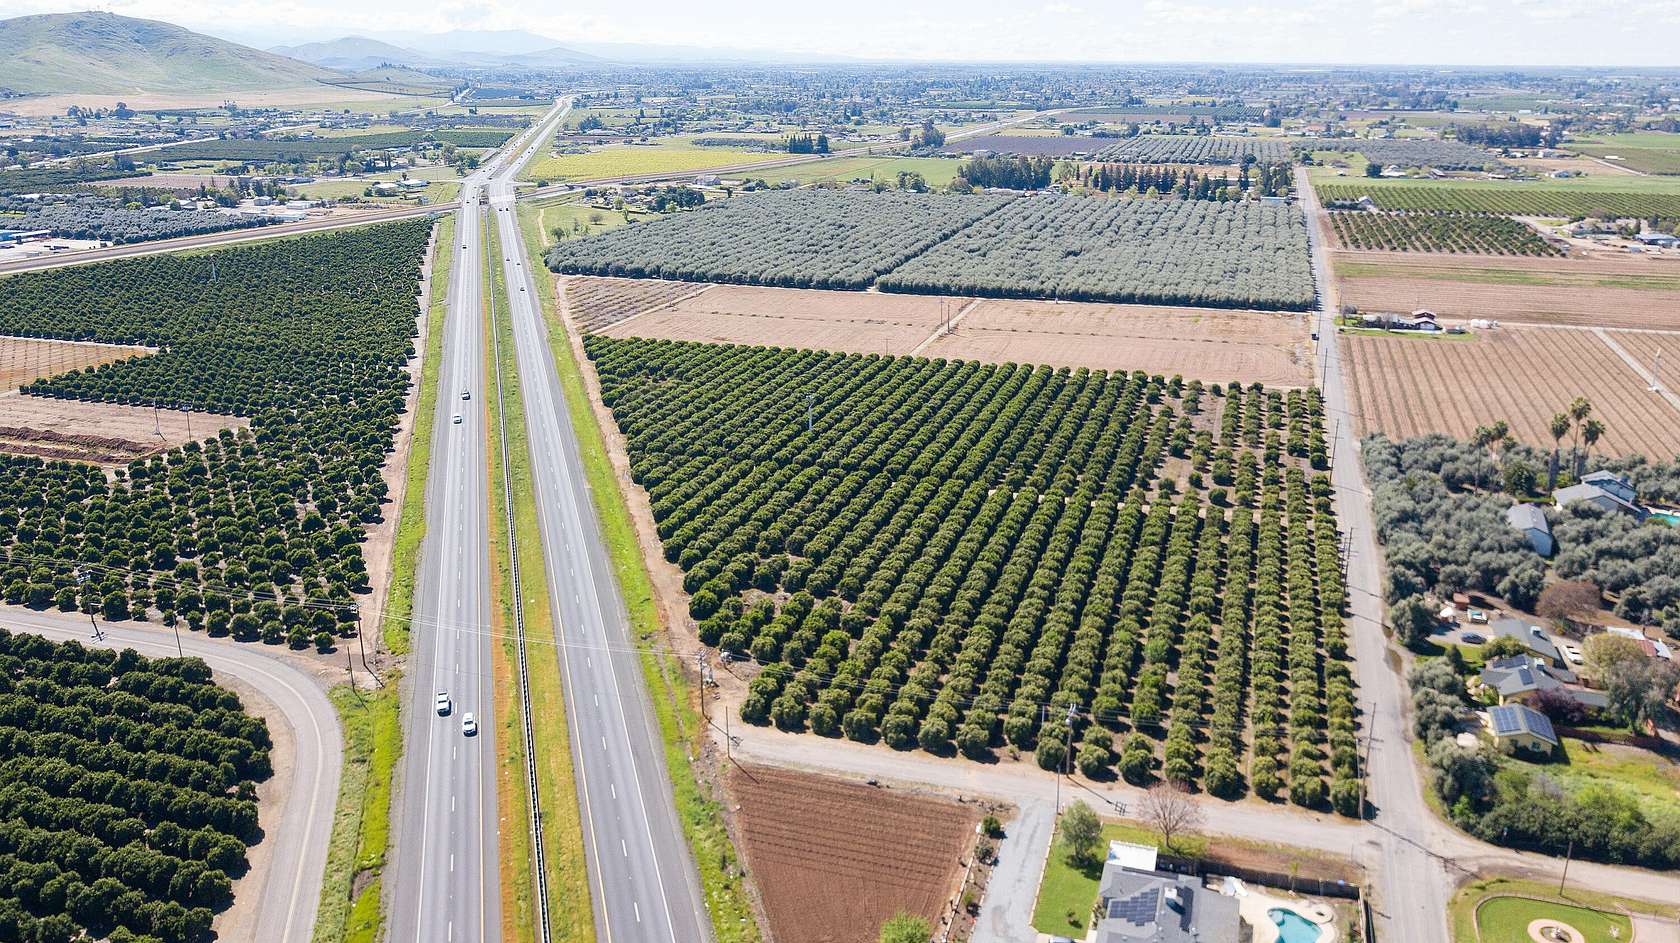 61 Acres of Agricultural Land for Sale in Strathmore, California